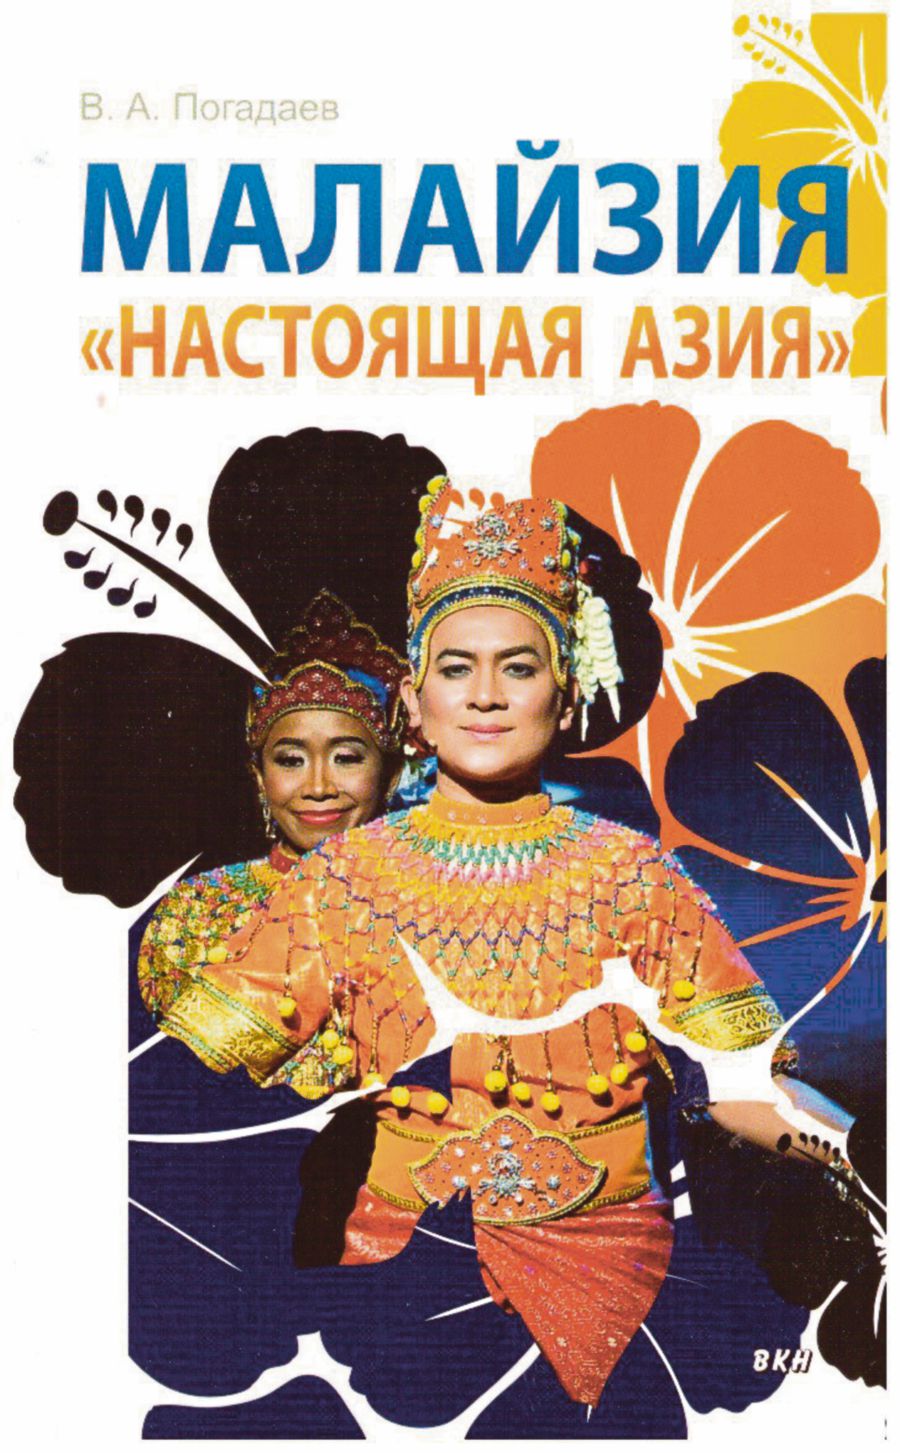 The cover of the writer’s book, Malaysia — Truly Asia, which is well-received in Russia. -Pic courtesy of writer